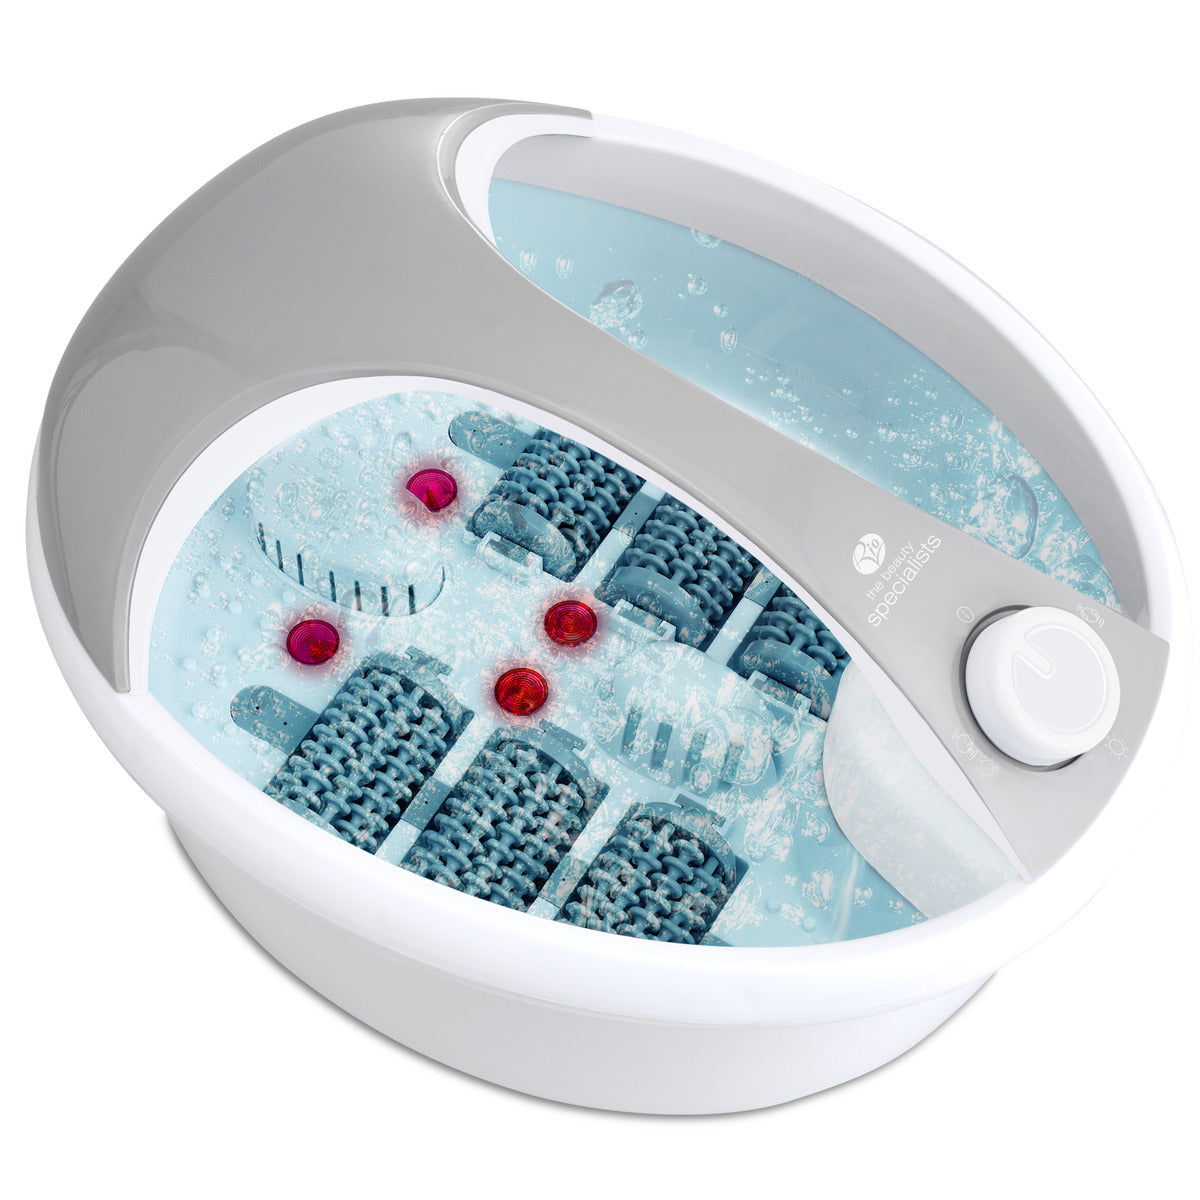 Deluxe Foot Spa Bath and Massager